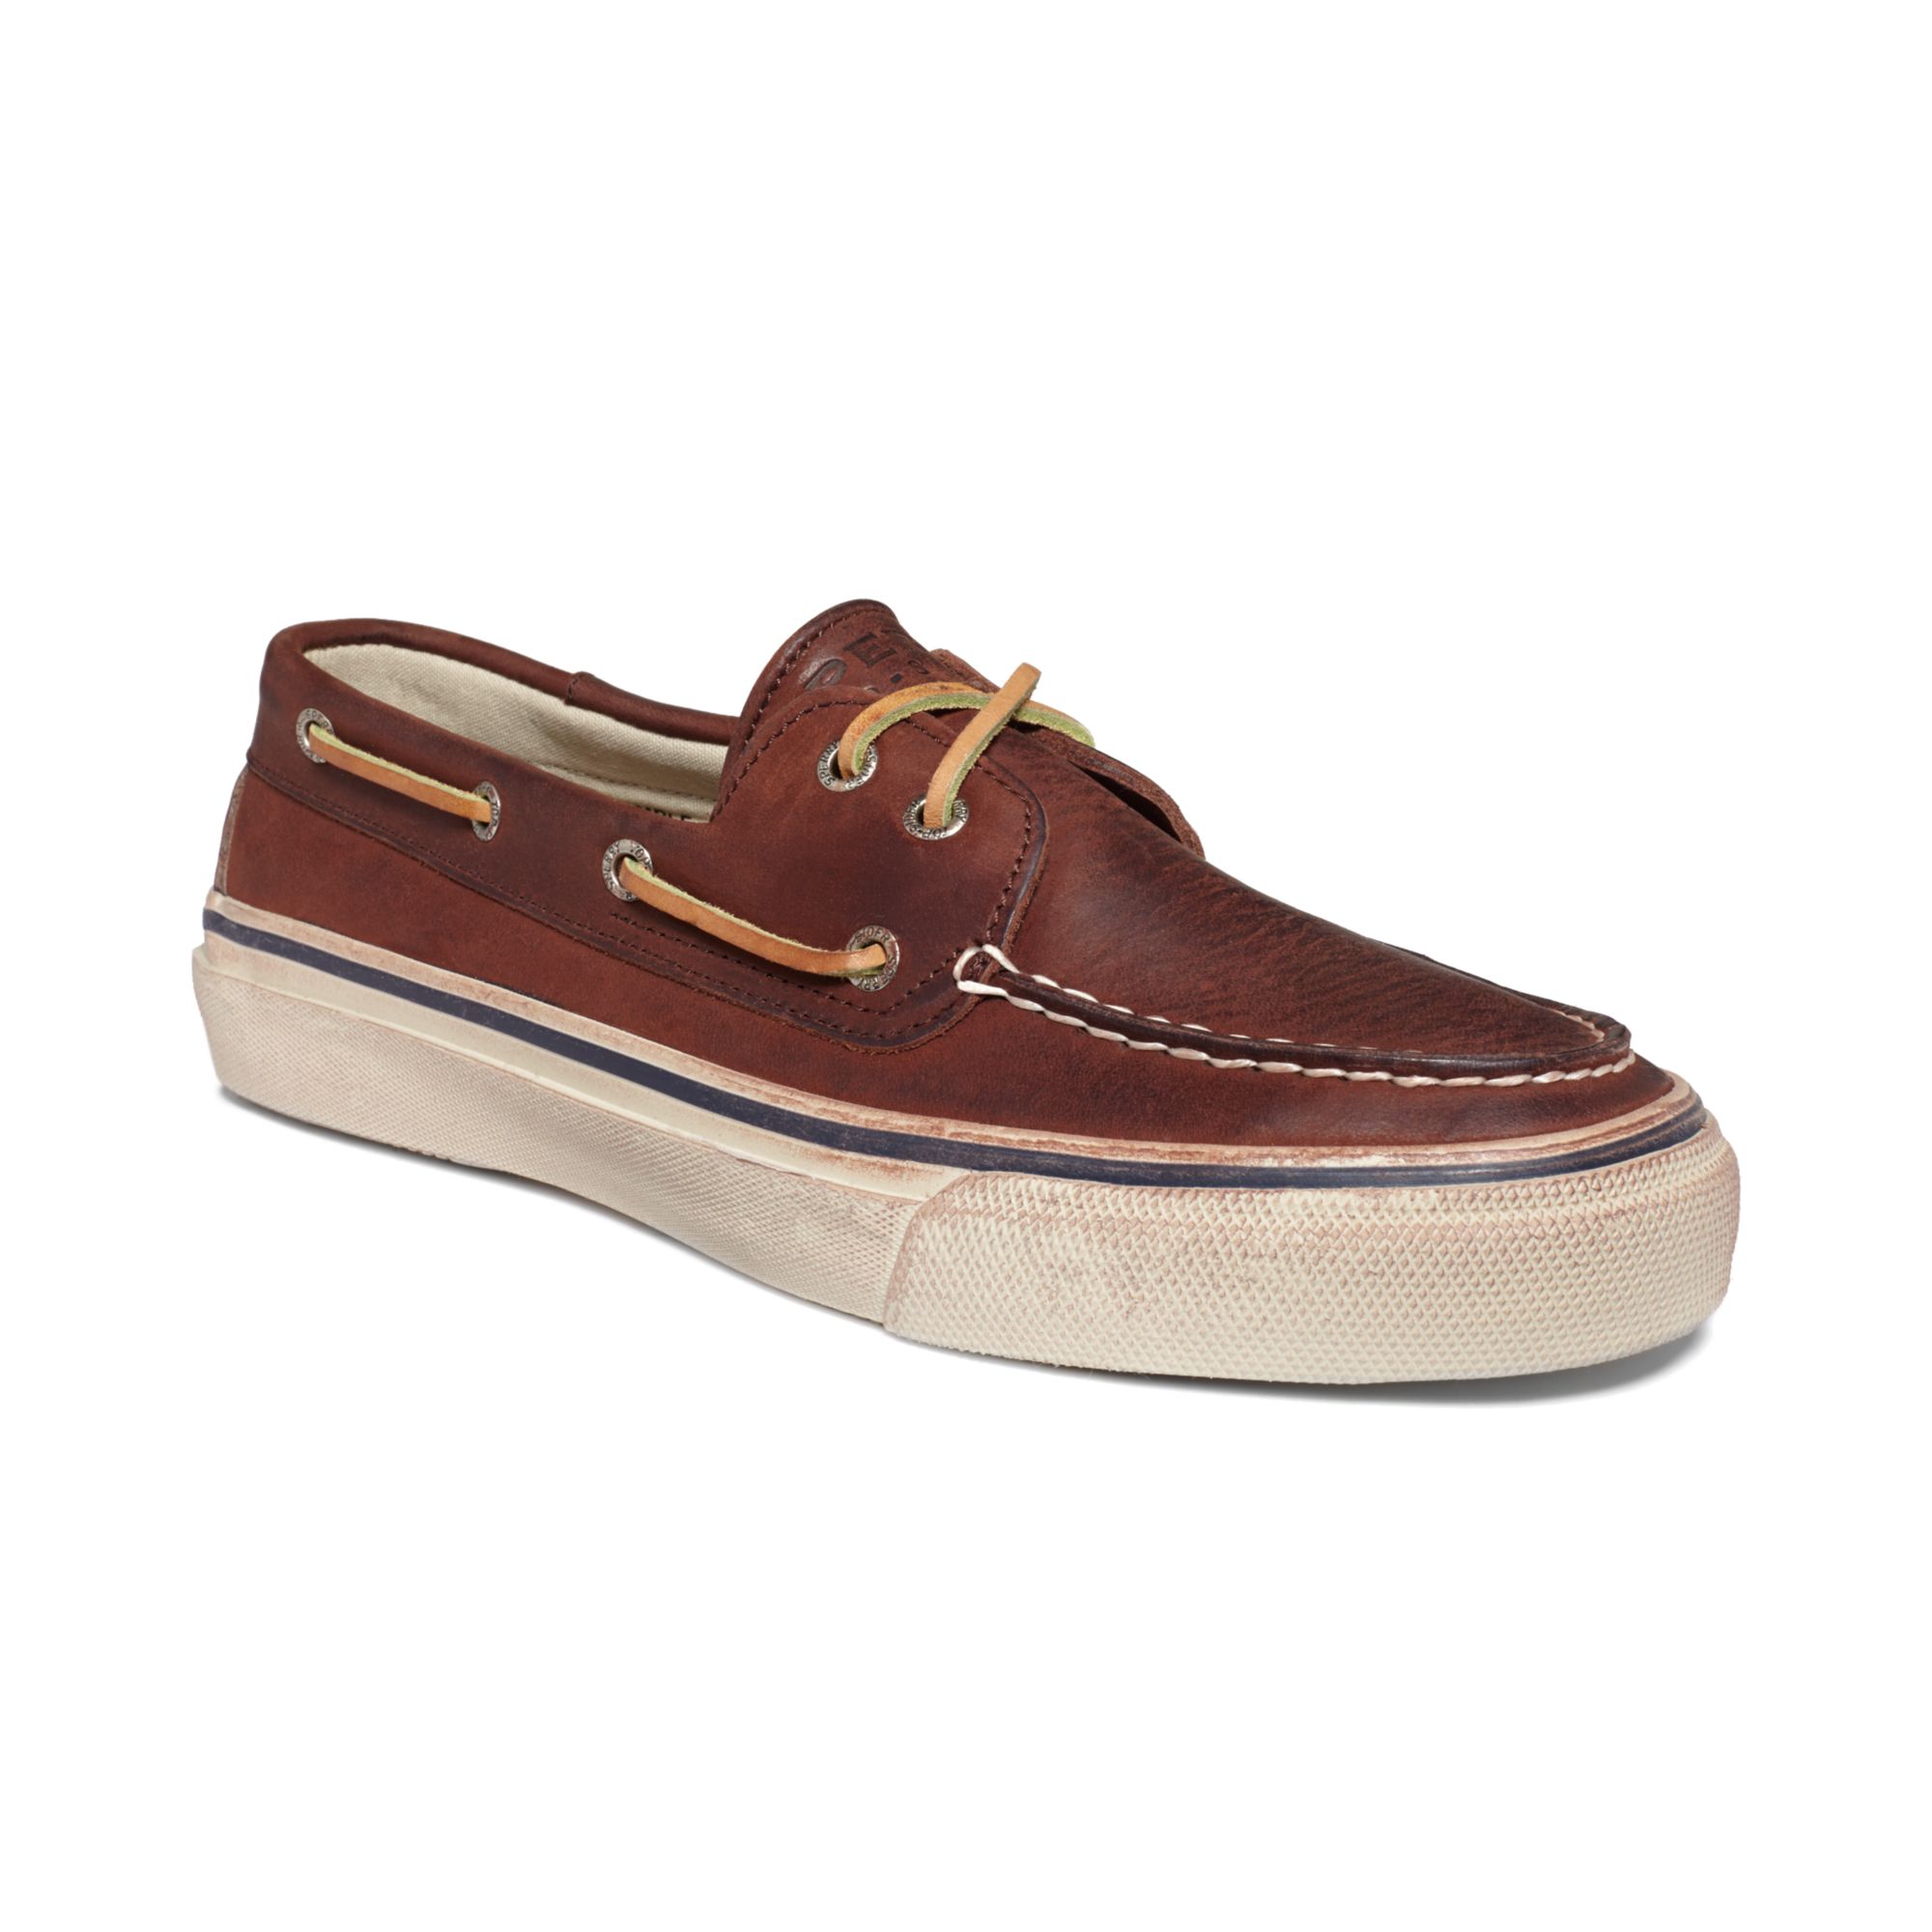 Sperry Top-Sider Bahama 2